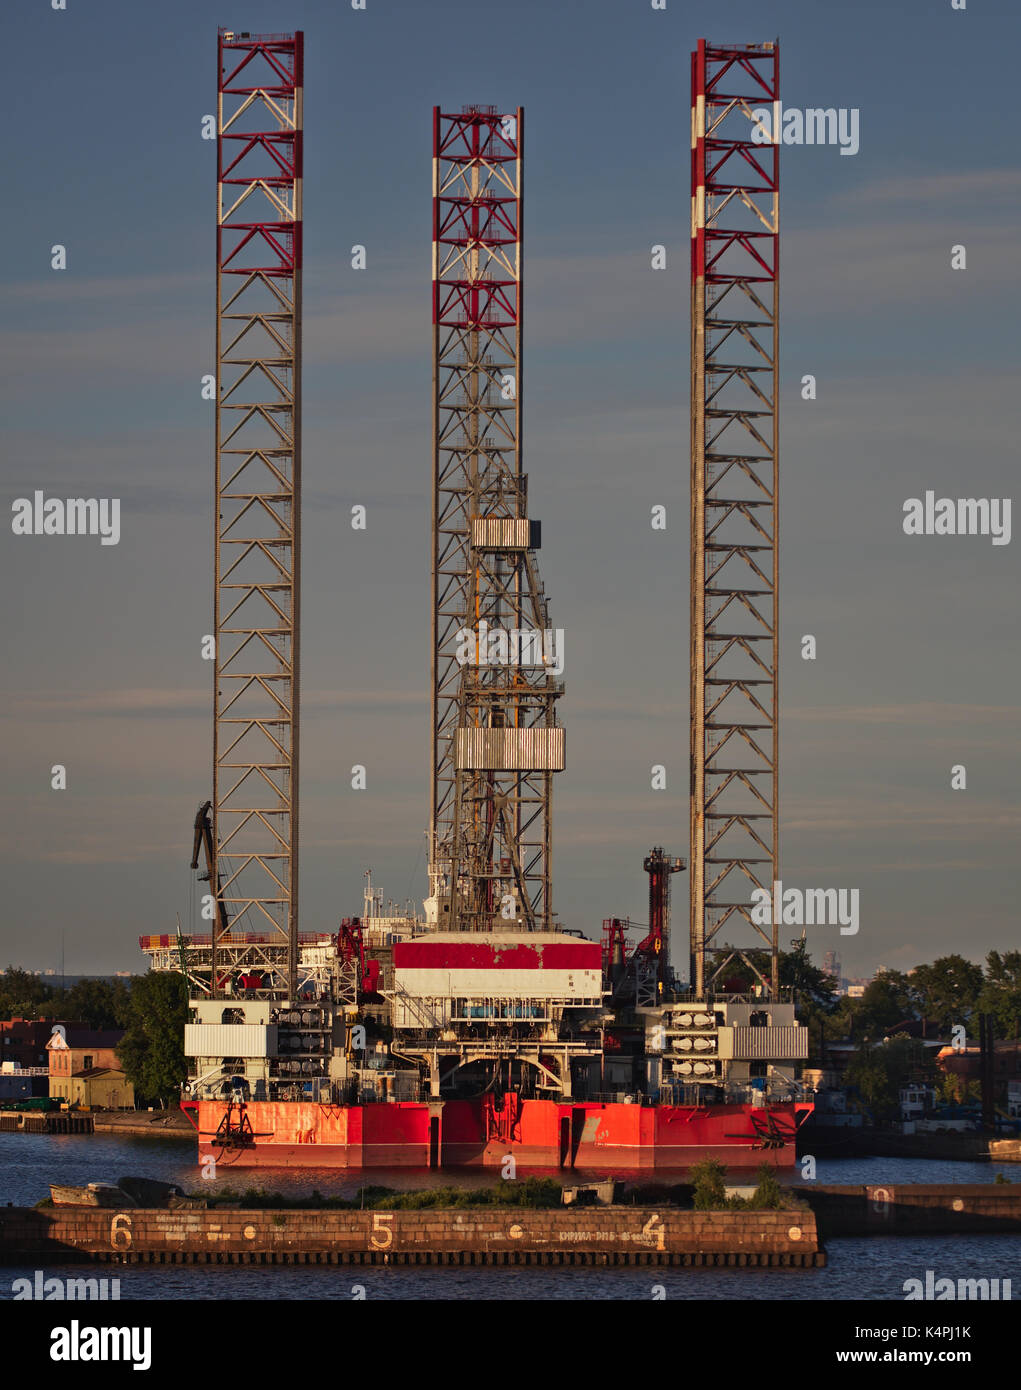 Offshore jackup rig in harbour Stock Photo